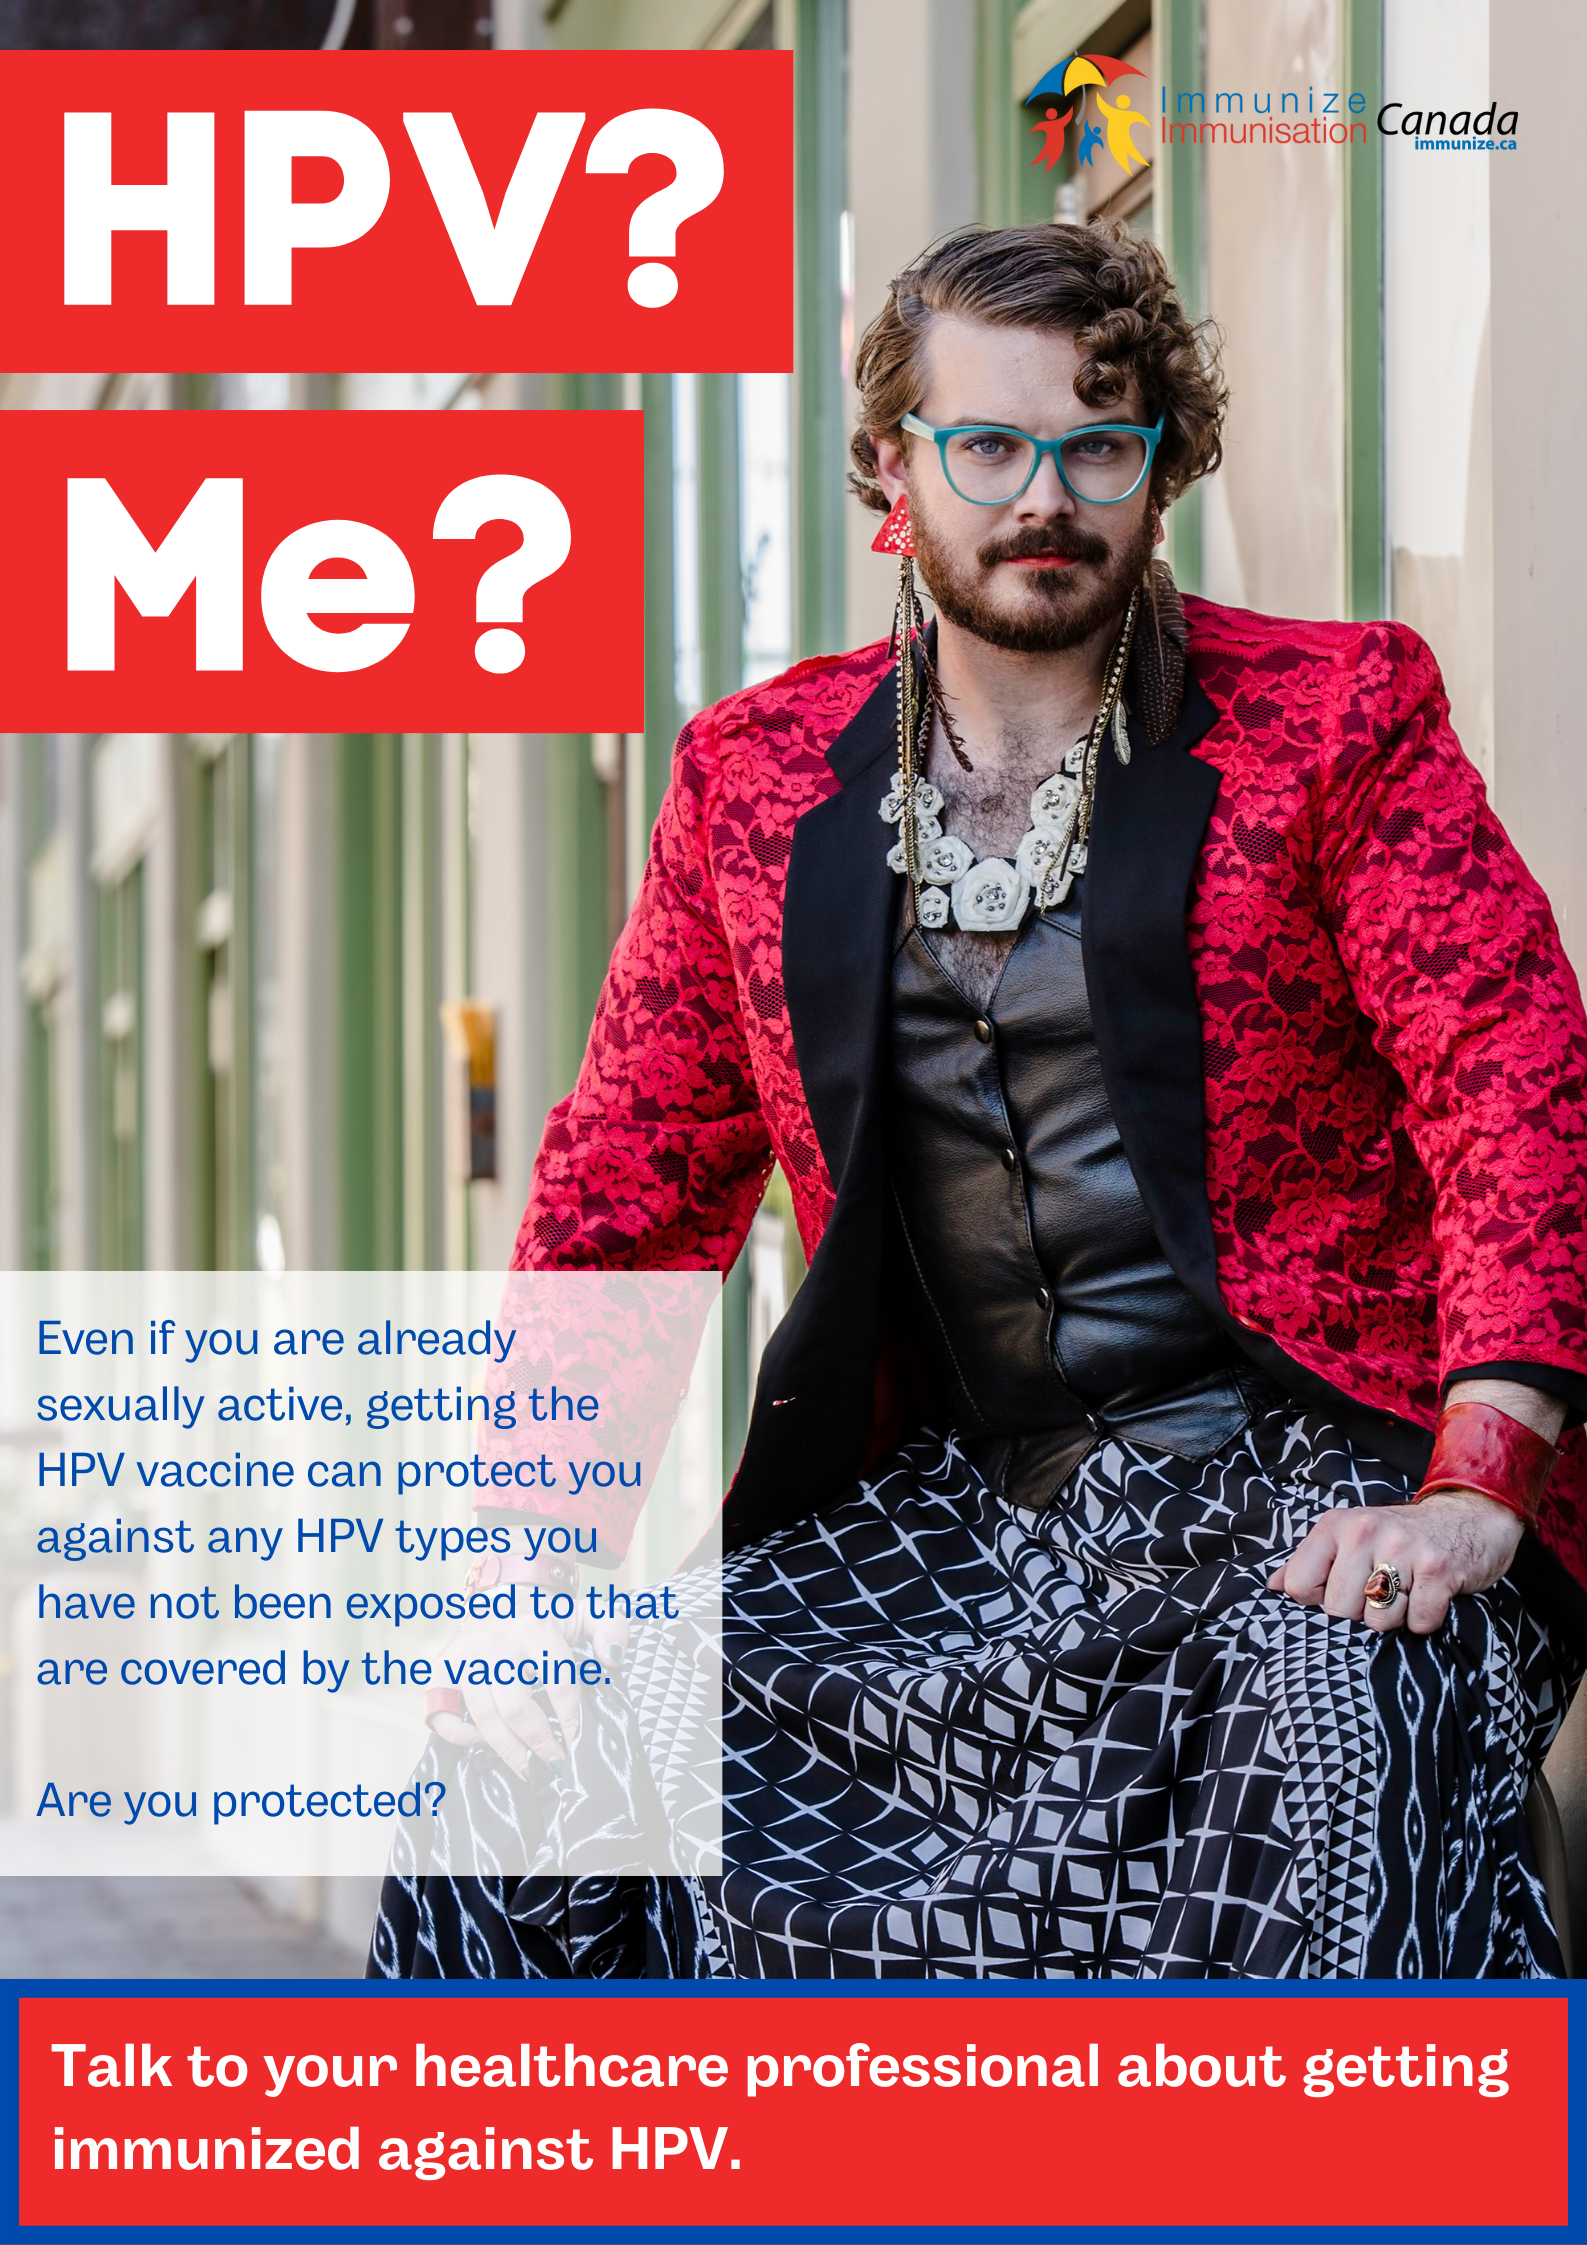 HPV? Me? (poster 9)